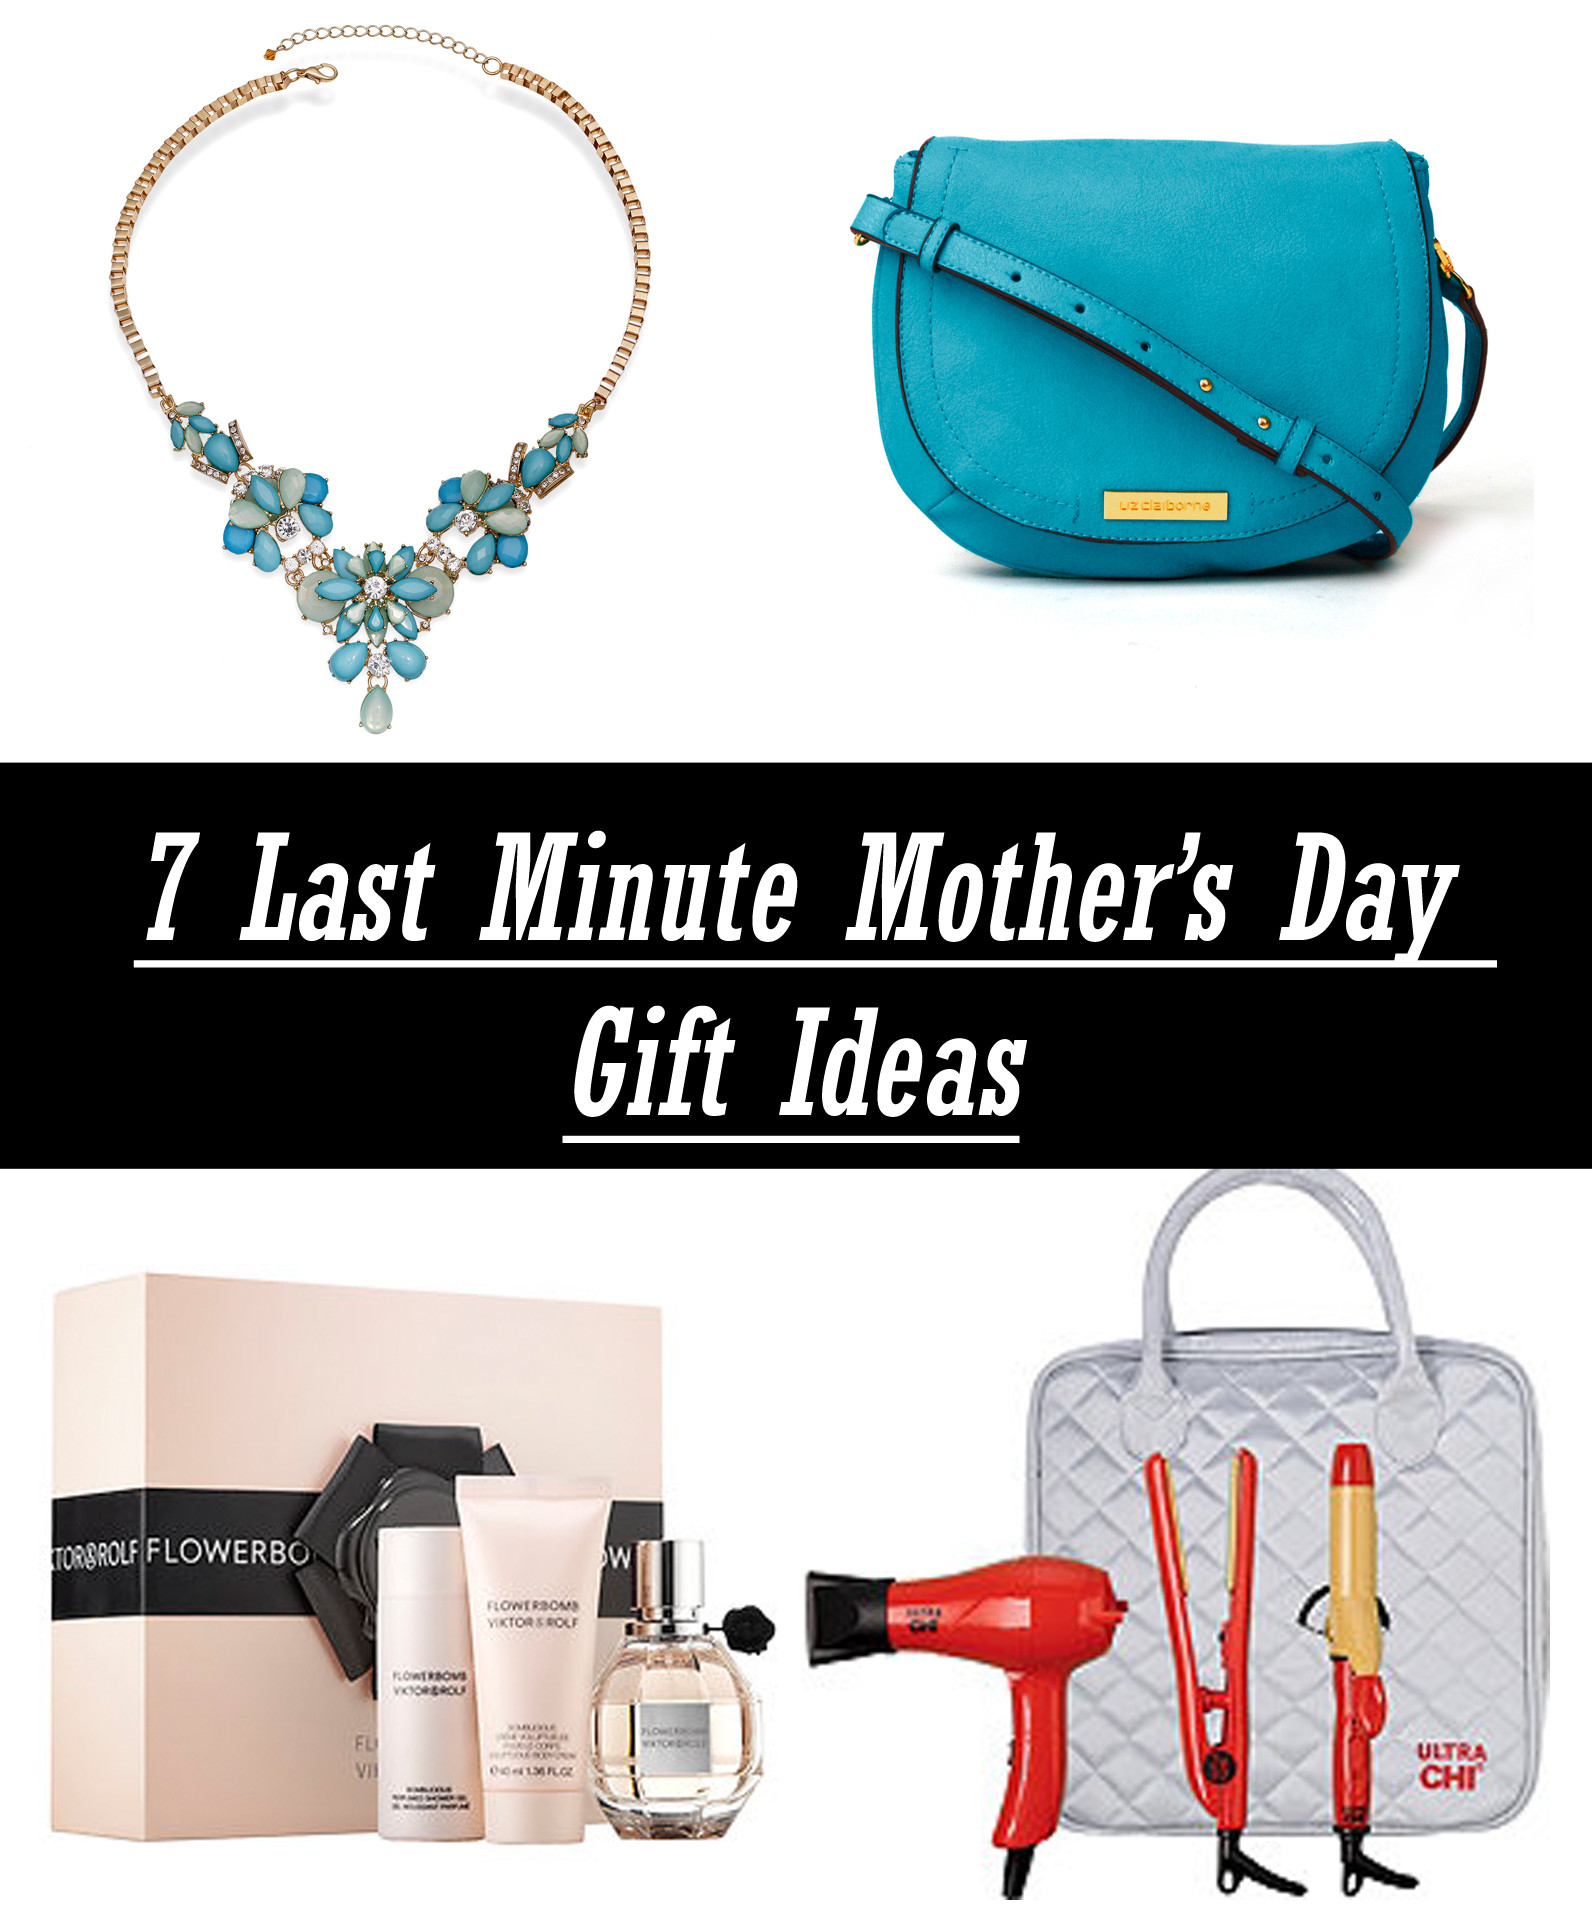 Last Minute Mother Day Gift Ideas
 7 Last Minute Mother s Day Gift Ideas